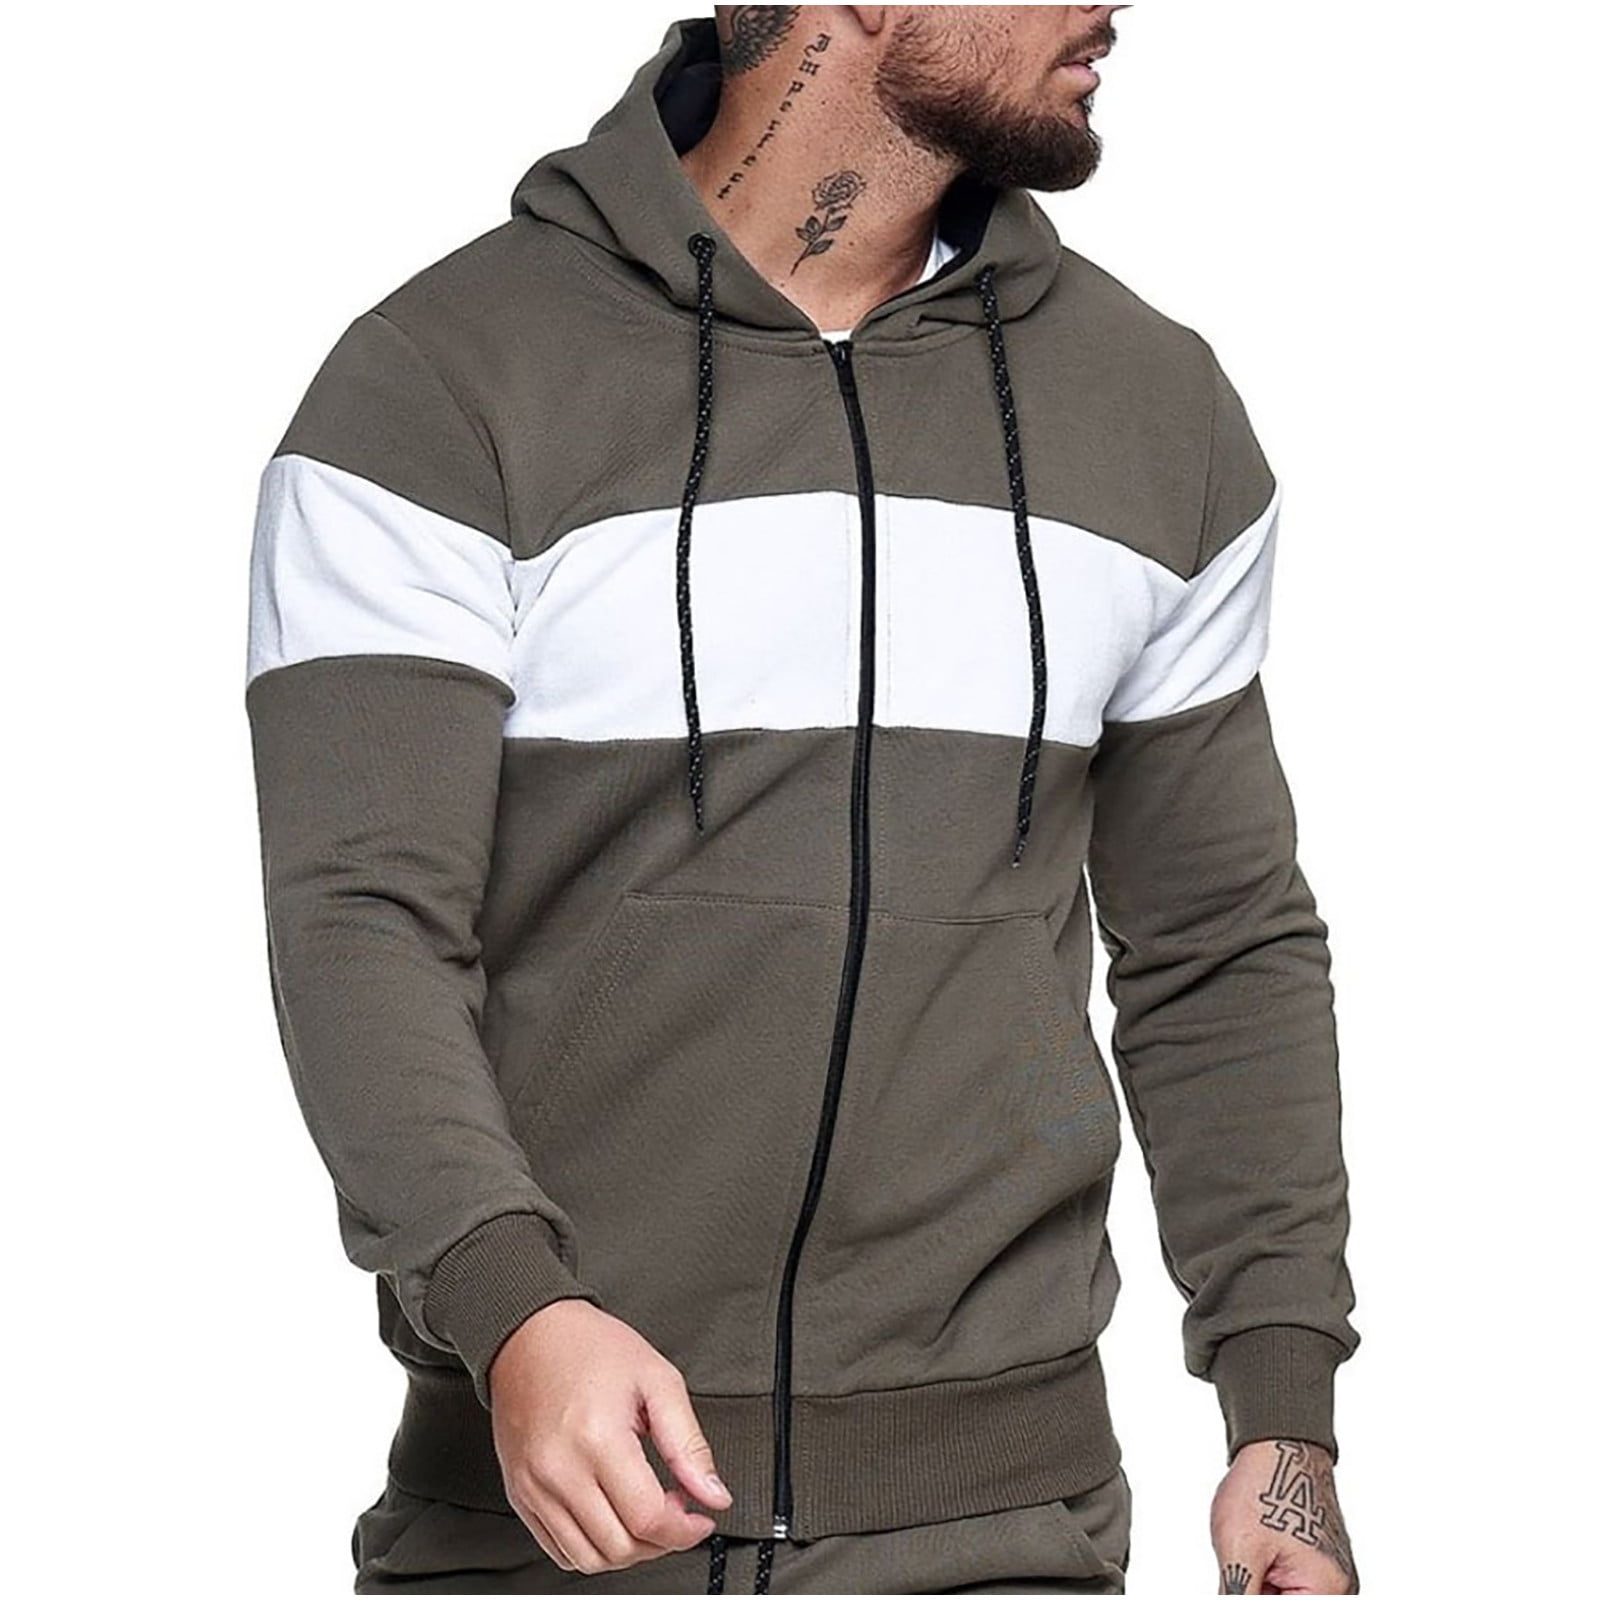 Clearance Under $5 Clothing,POROPL Pullover Hoodies Sweatshirt Sweater for Men Green Size 3xl - Walmart.com